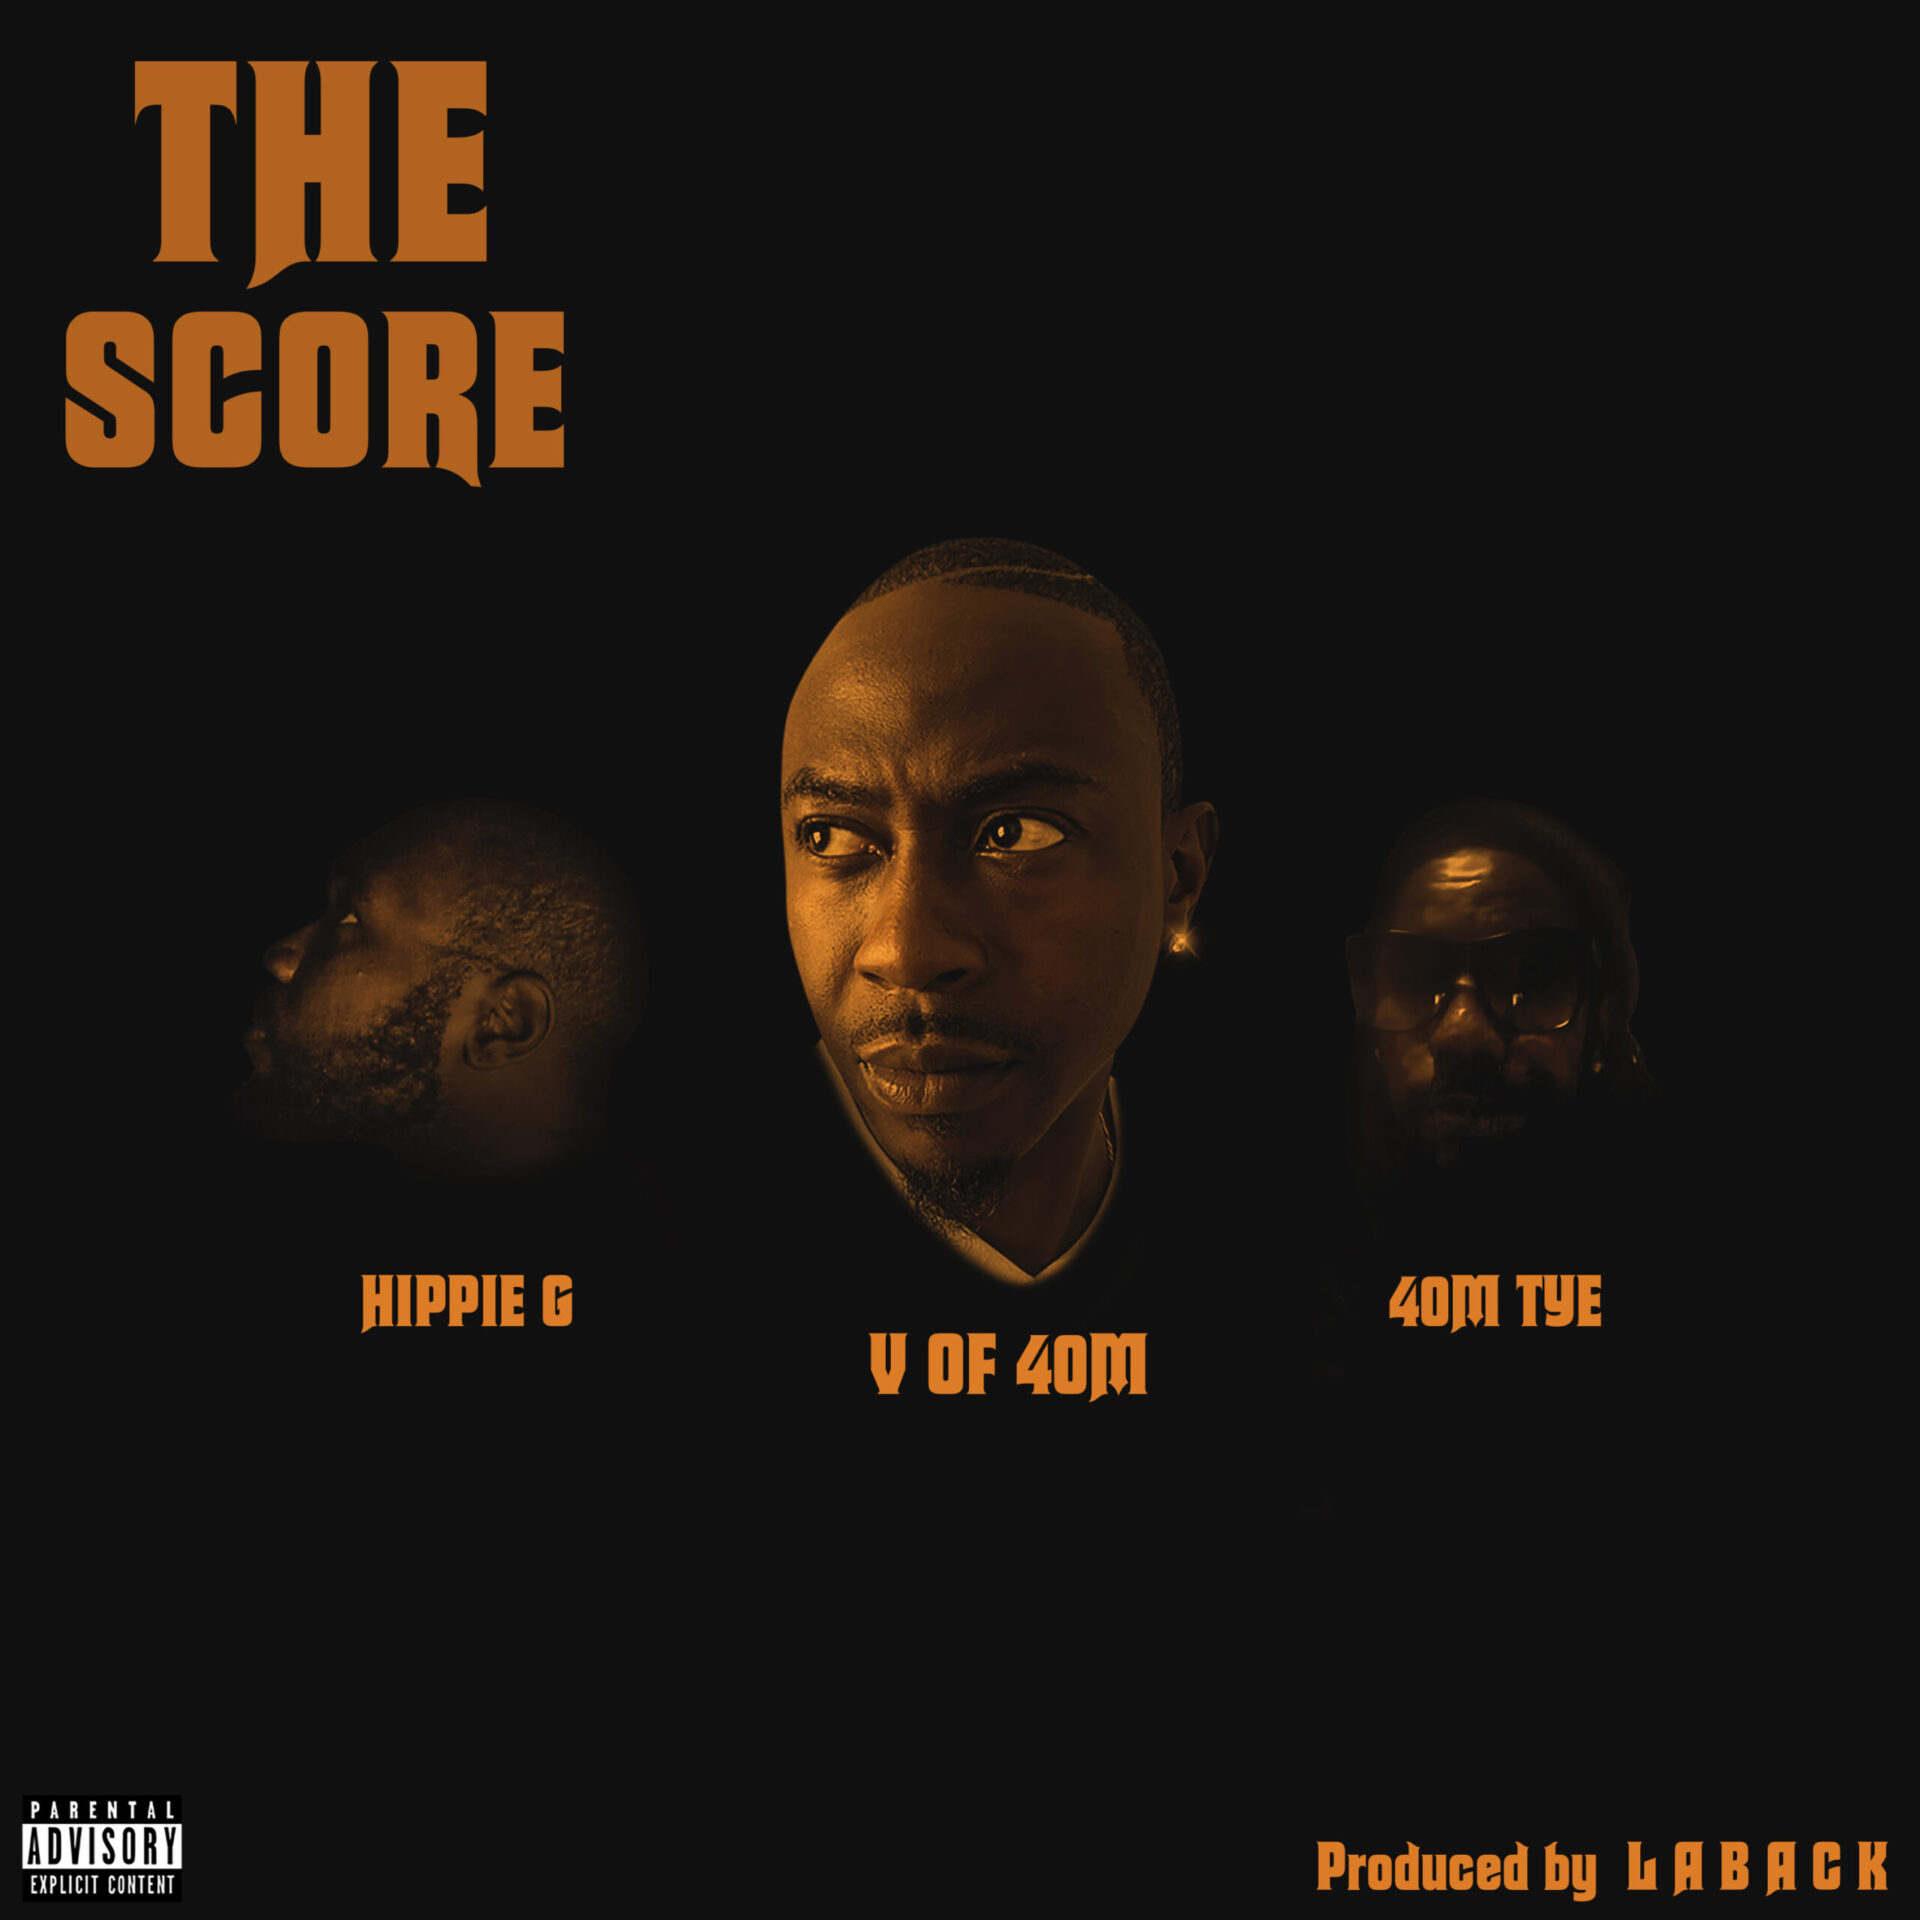 The Score by V of 40M featuring 40M Tye and Hippie G cover art